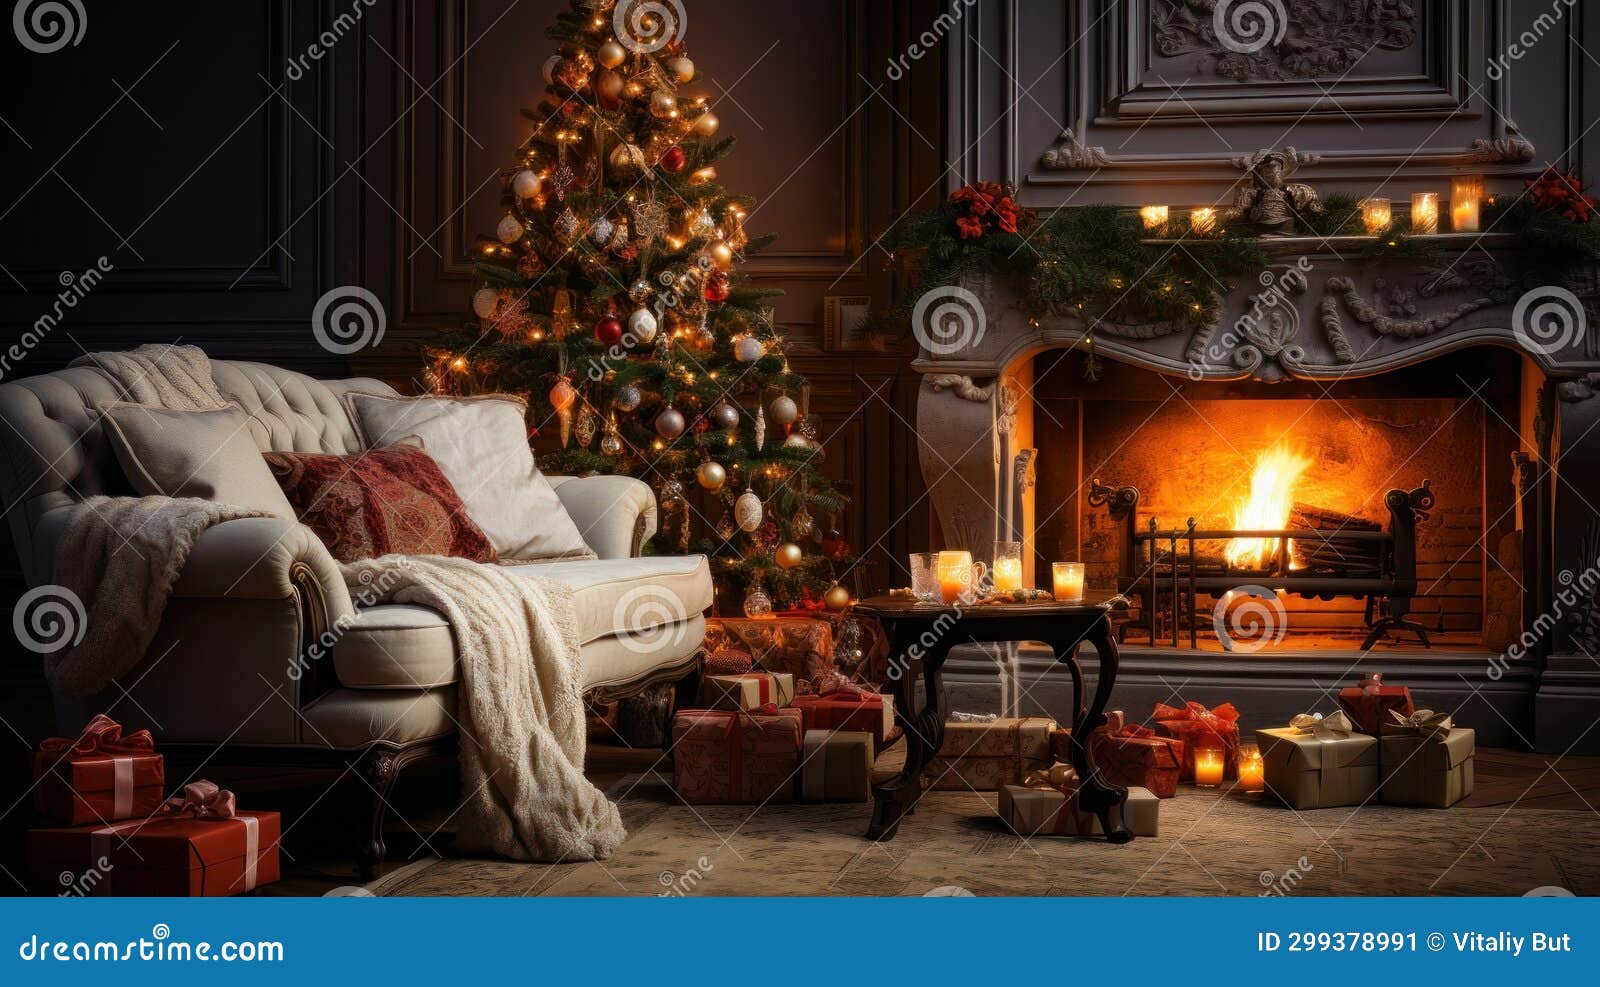 Christmas Interior of a Large Cozy House with a Christmas Tree and a ...